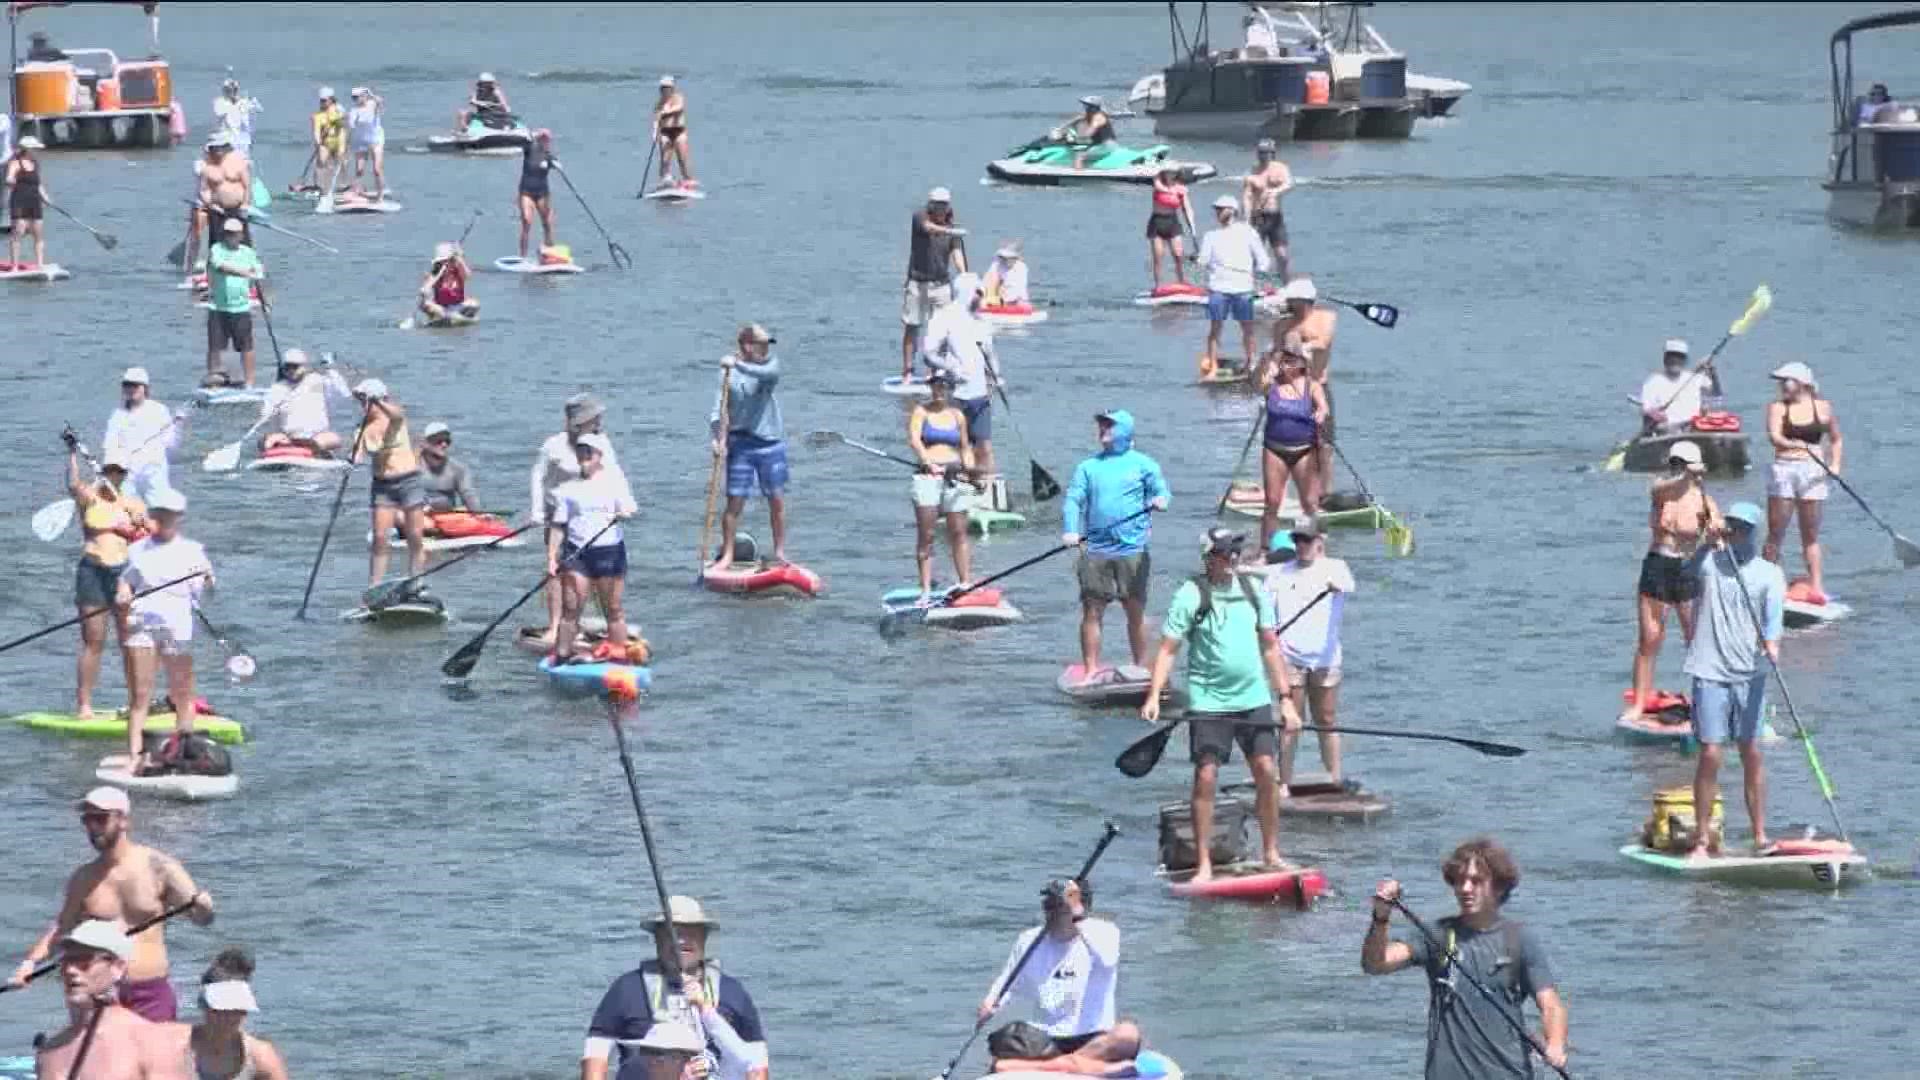 The paddlers boarded 21 miles as part of the Tyler's Dam that Cancer event.